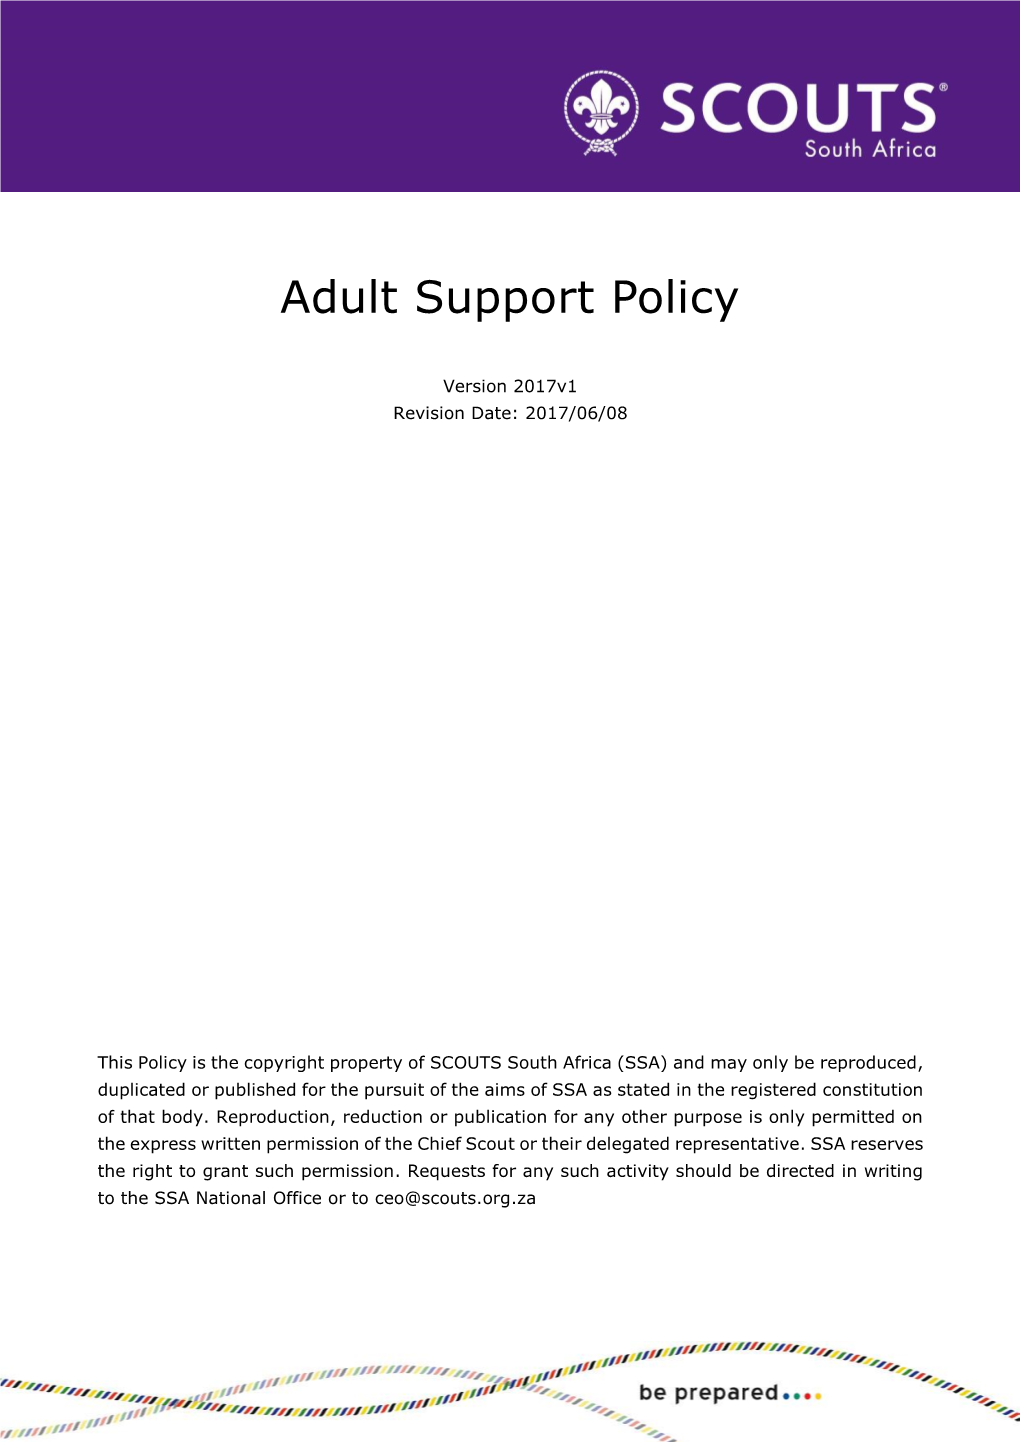 Adult Support Policy